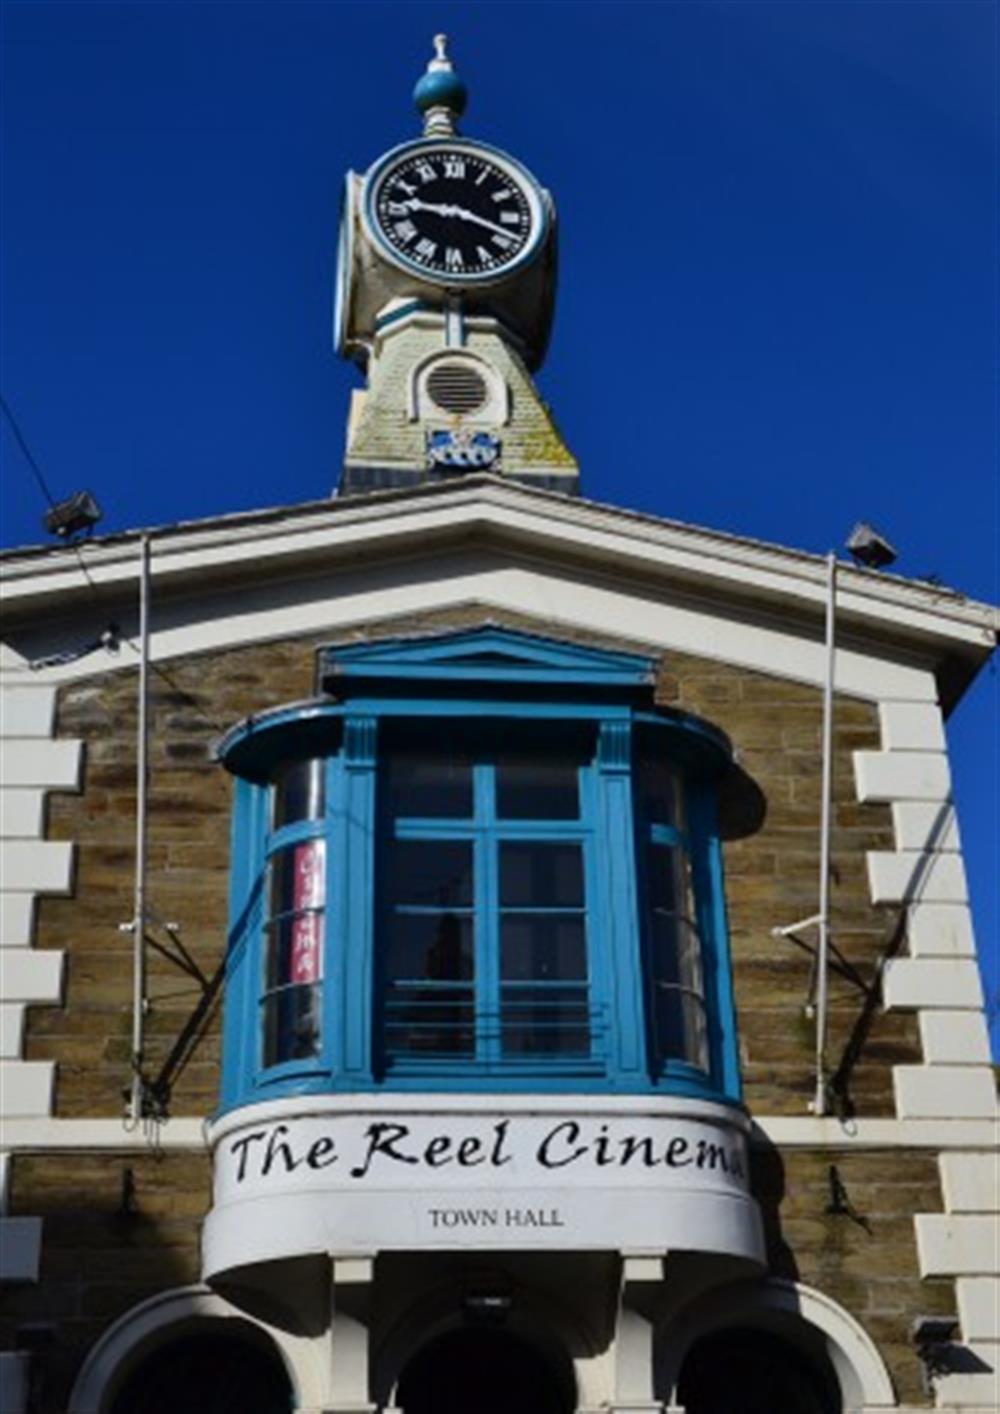 The Reel Cinema - perfect for those rainy days! at Southcliffe in Kingsbridge